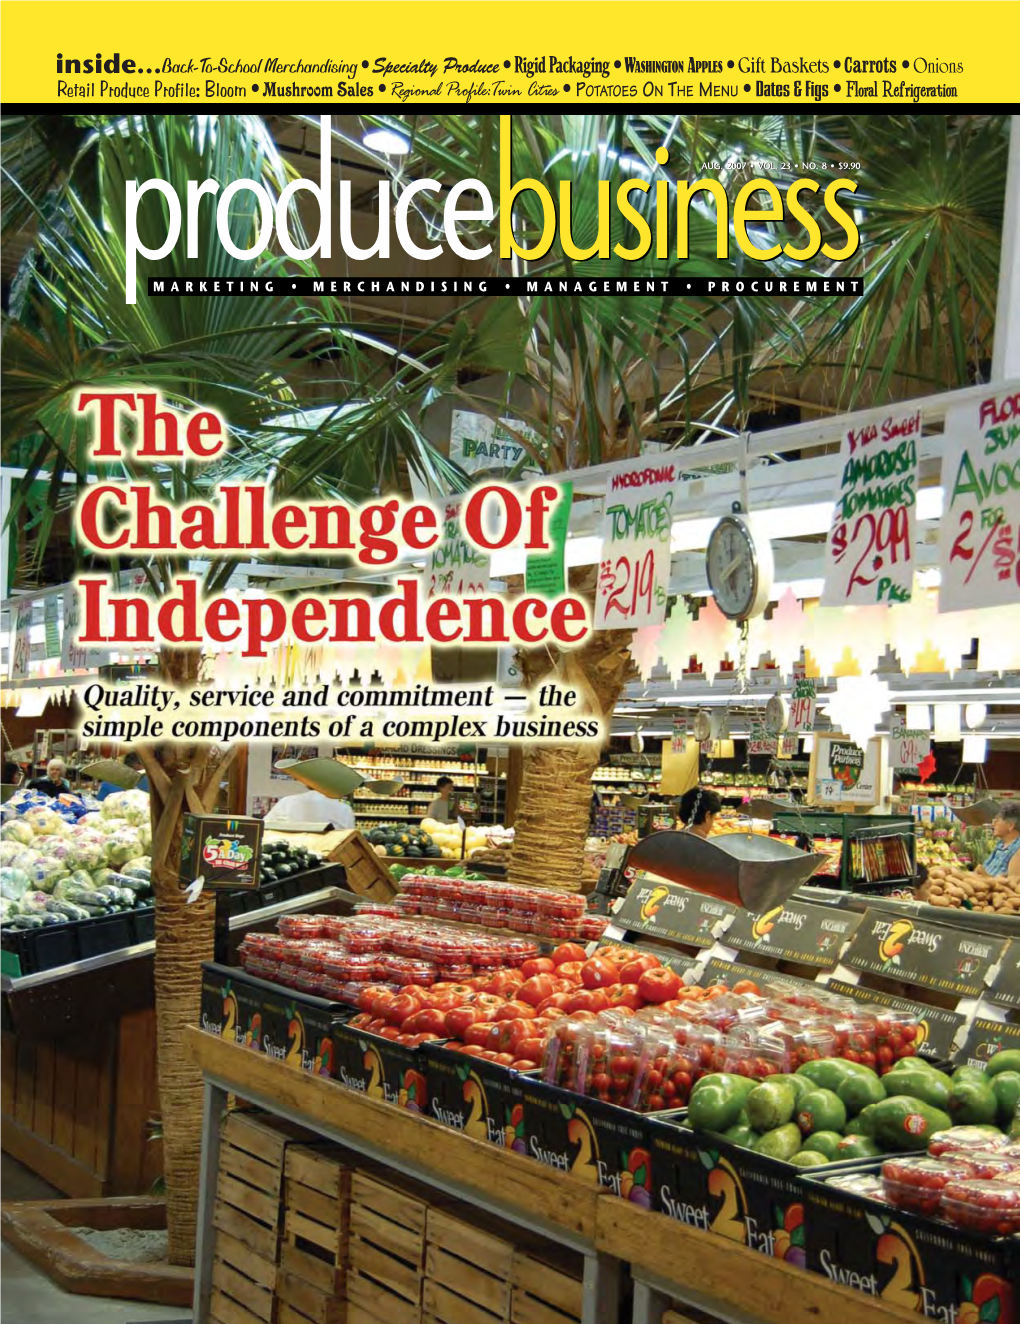 Produce Business August 2007